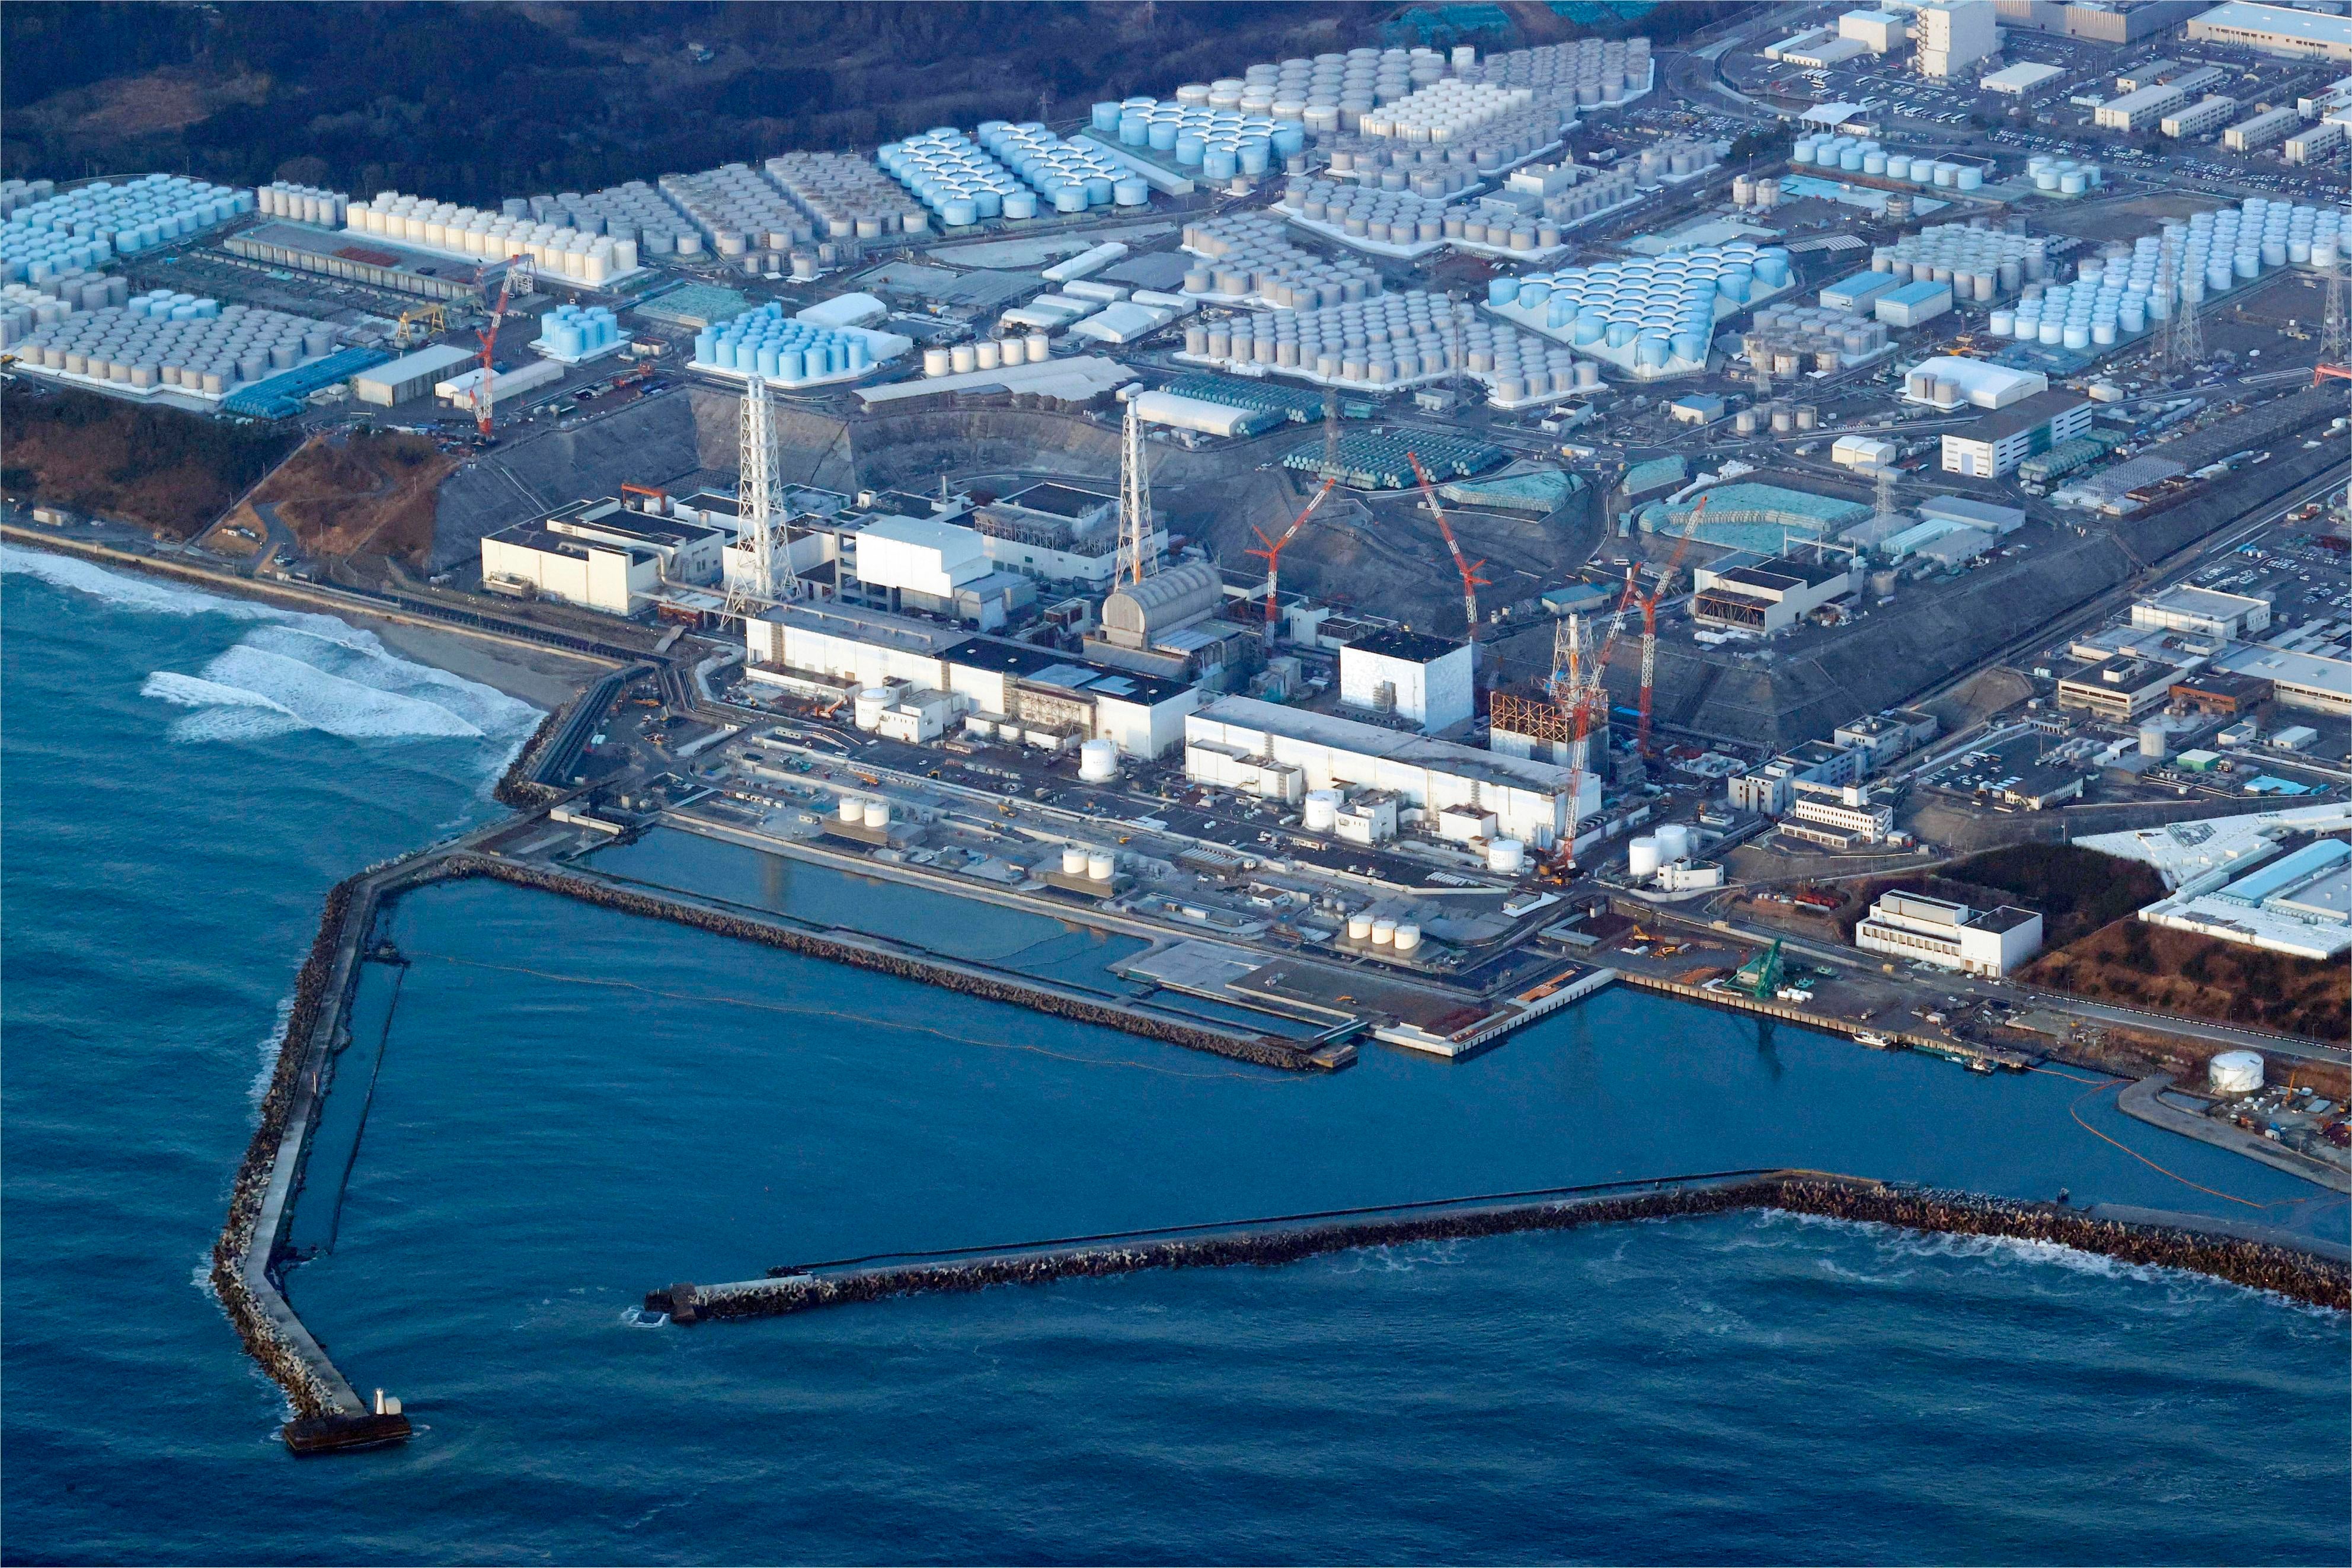 The Fukushima Daiichi nuclear power plant in Okuma is still being decommissioned